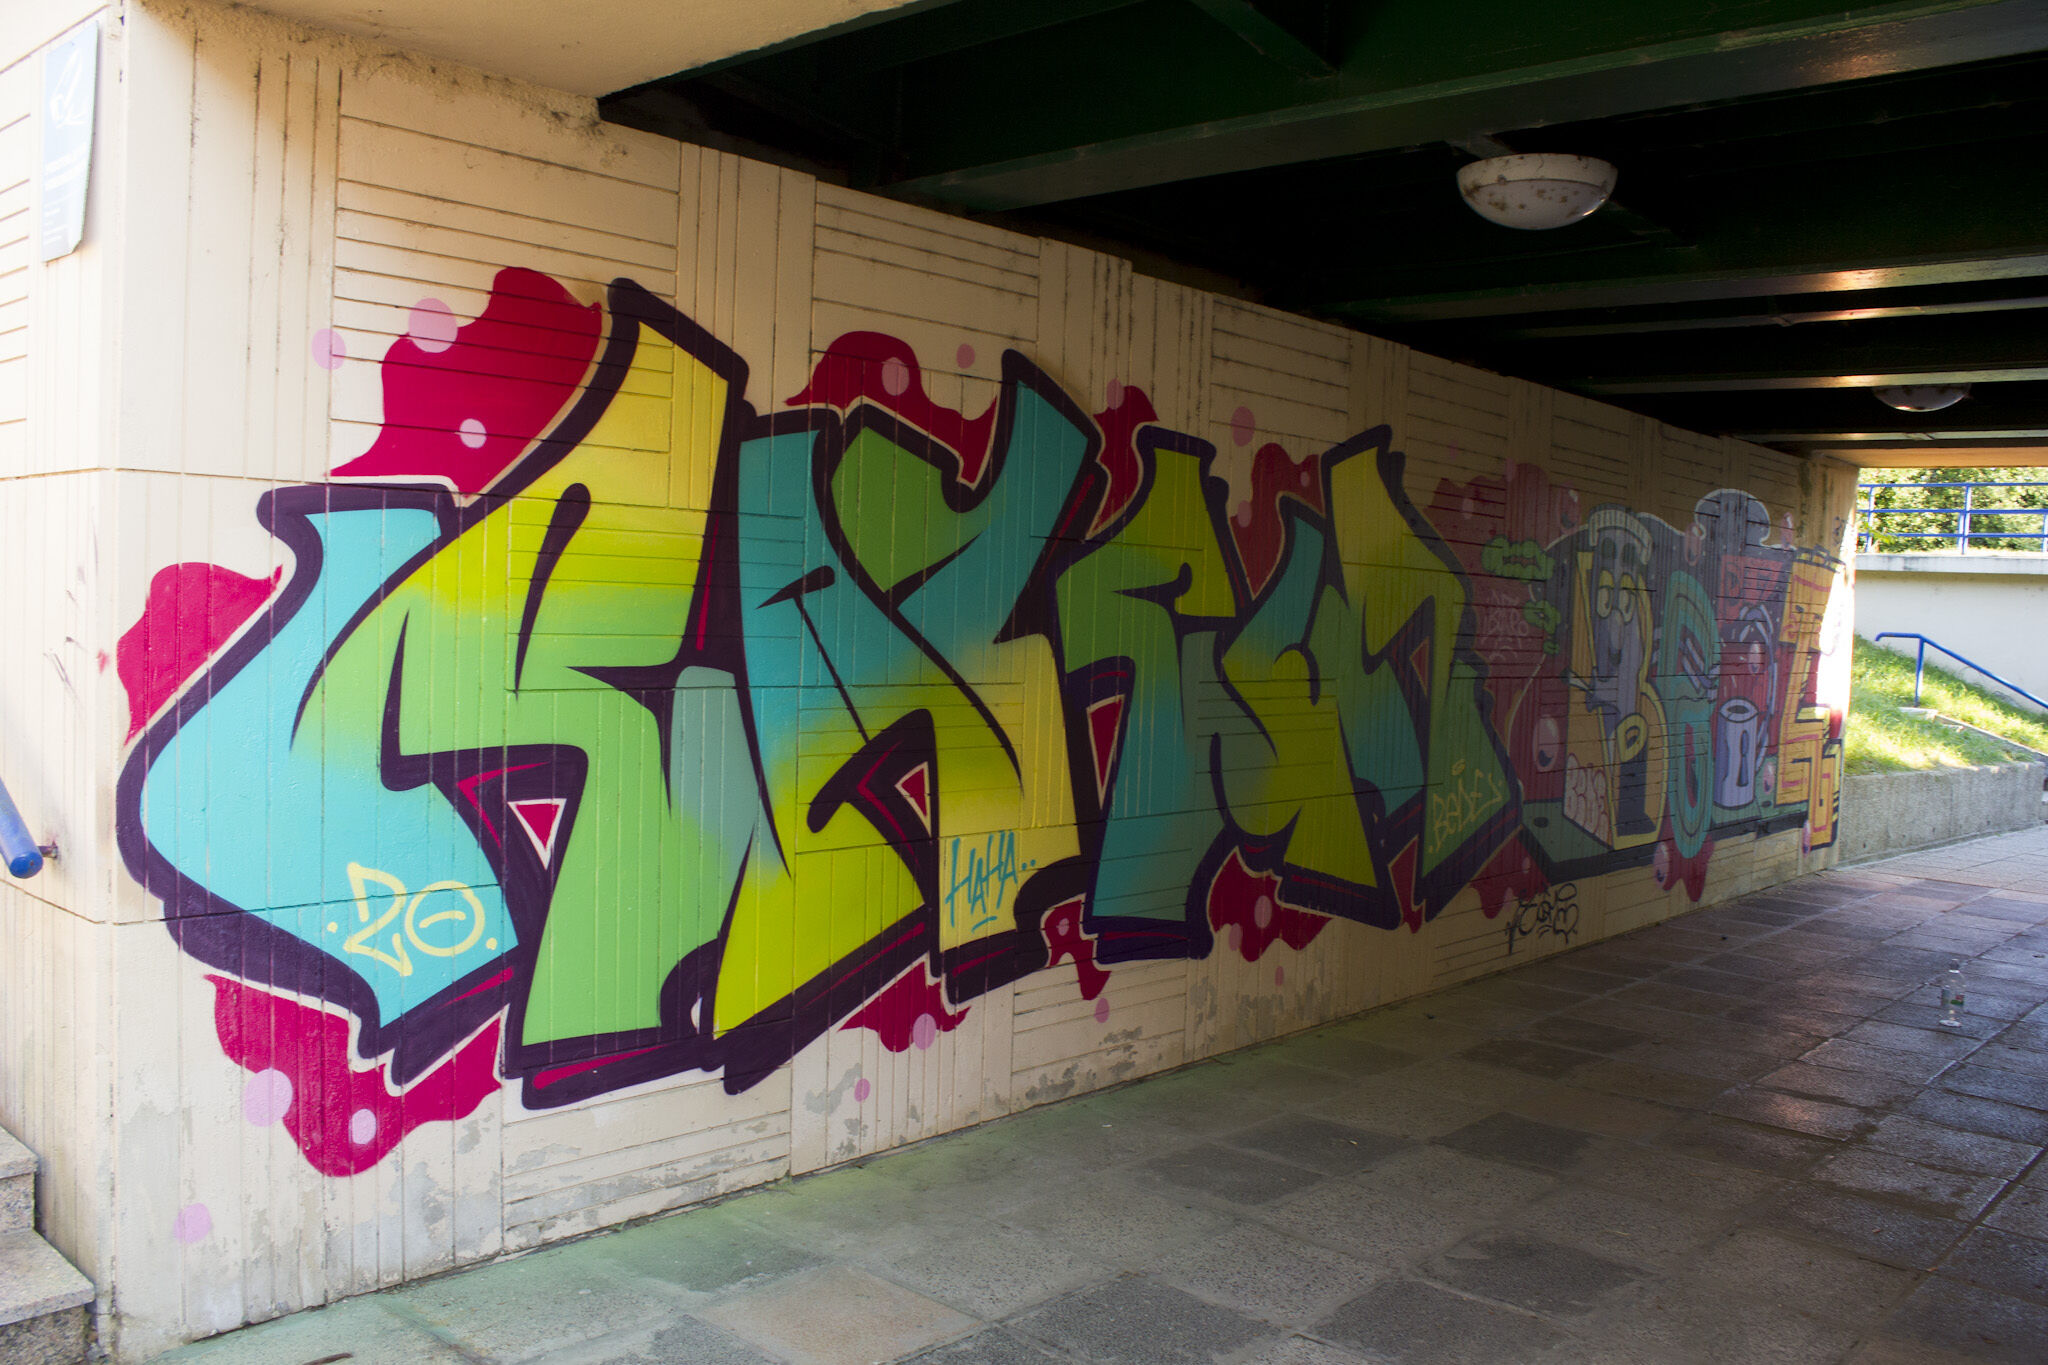 Chez186, Sarme, Poster, Kexer, Chino, Smack184, Lunar&mdash;Only fools and cans